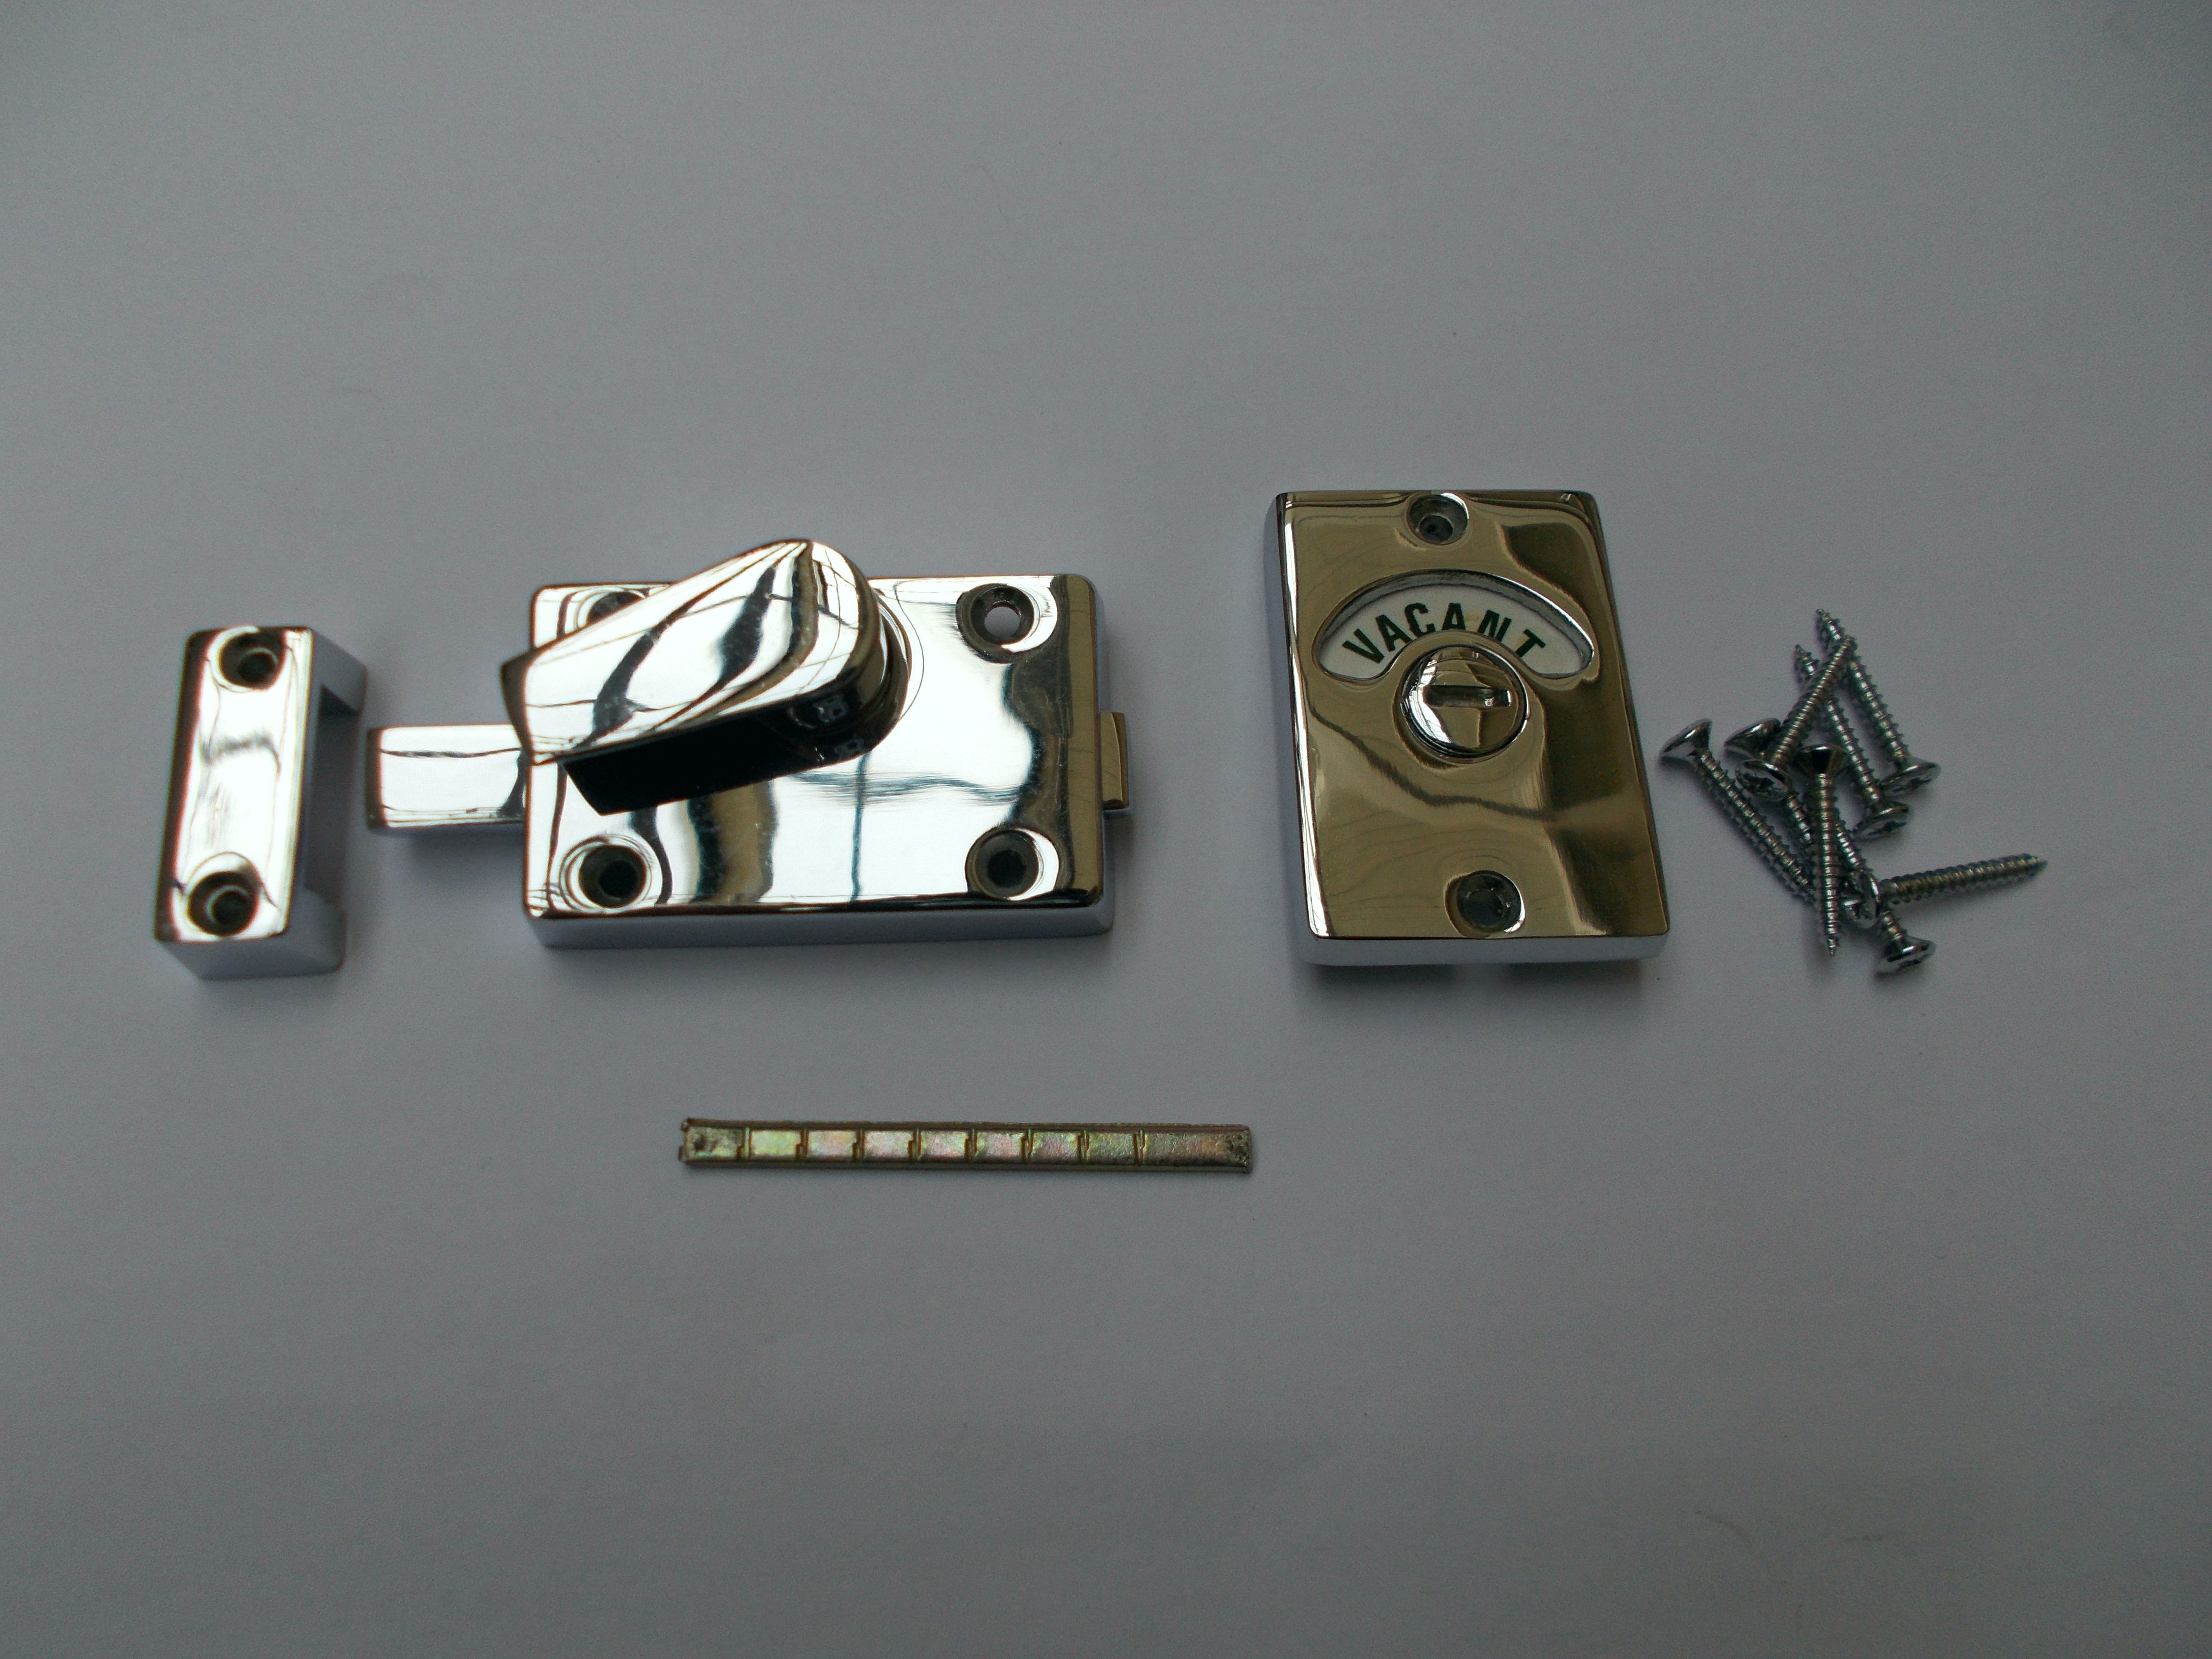 Details about   Brass Bathroom Toilet Indicator Lock Bolt,Vintage Style Vacant Engaged Lock Bolt 